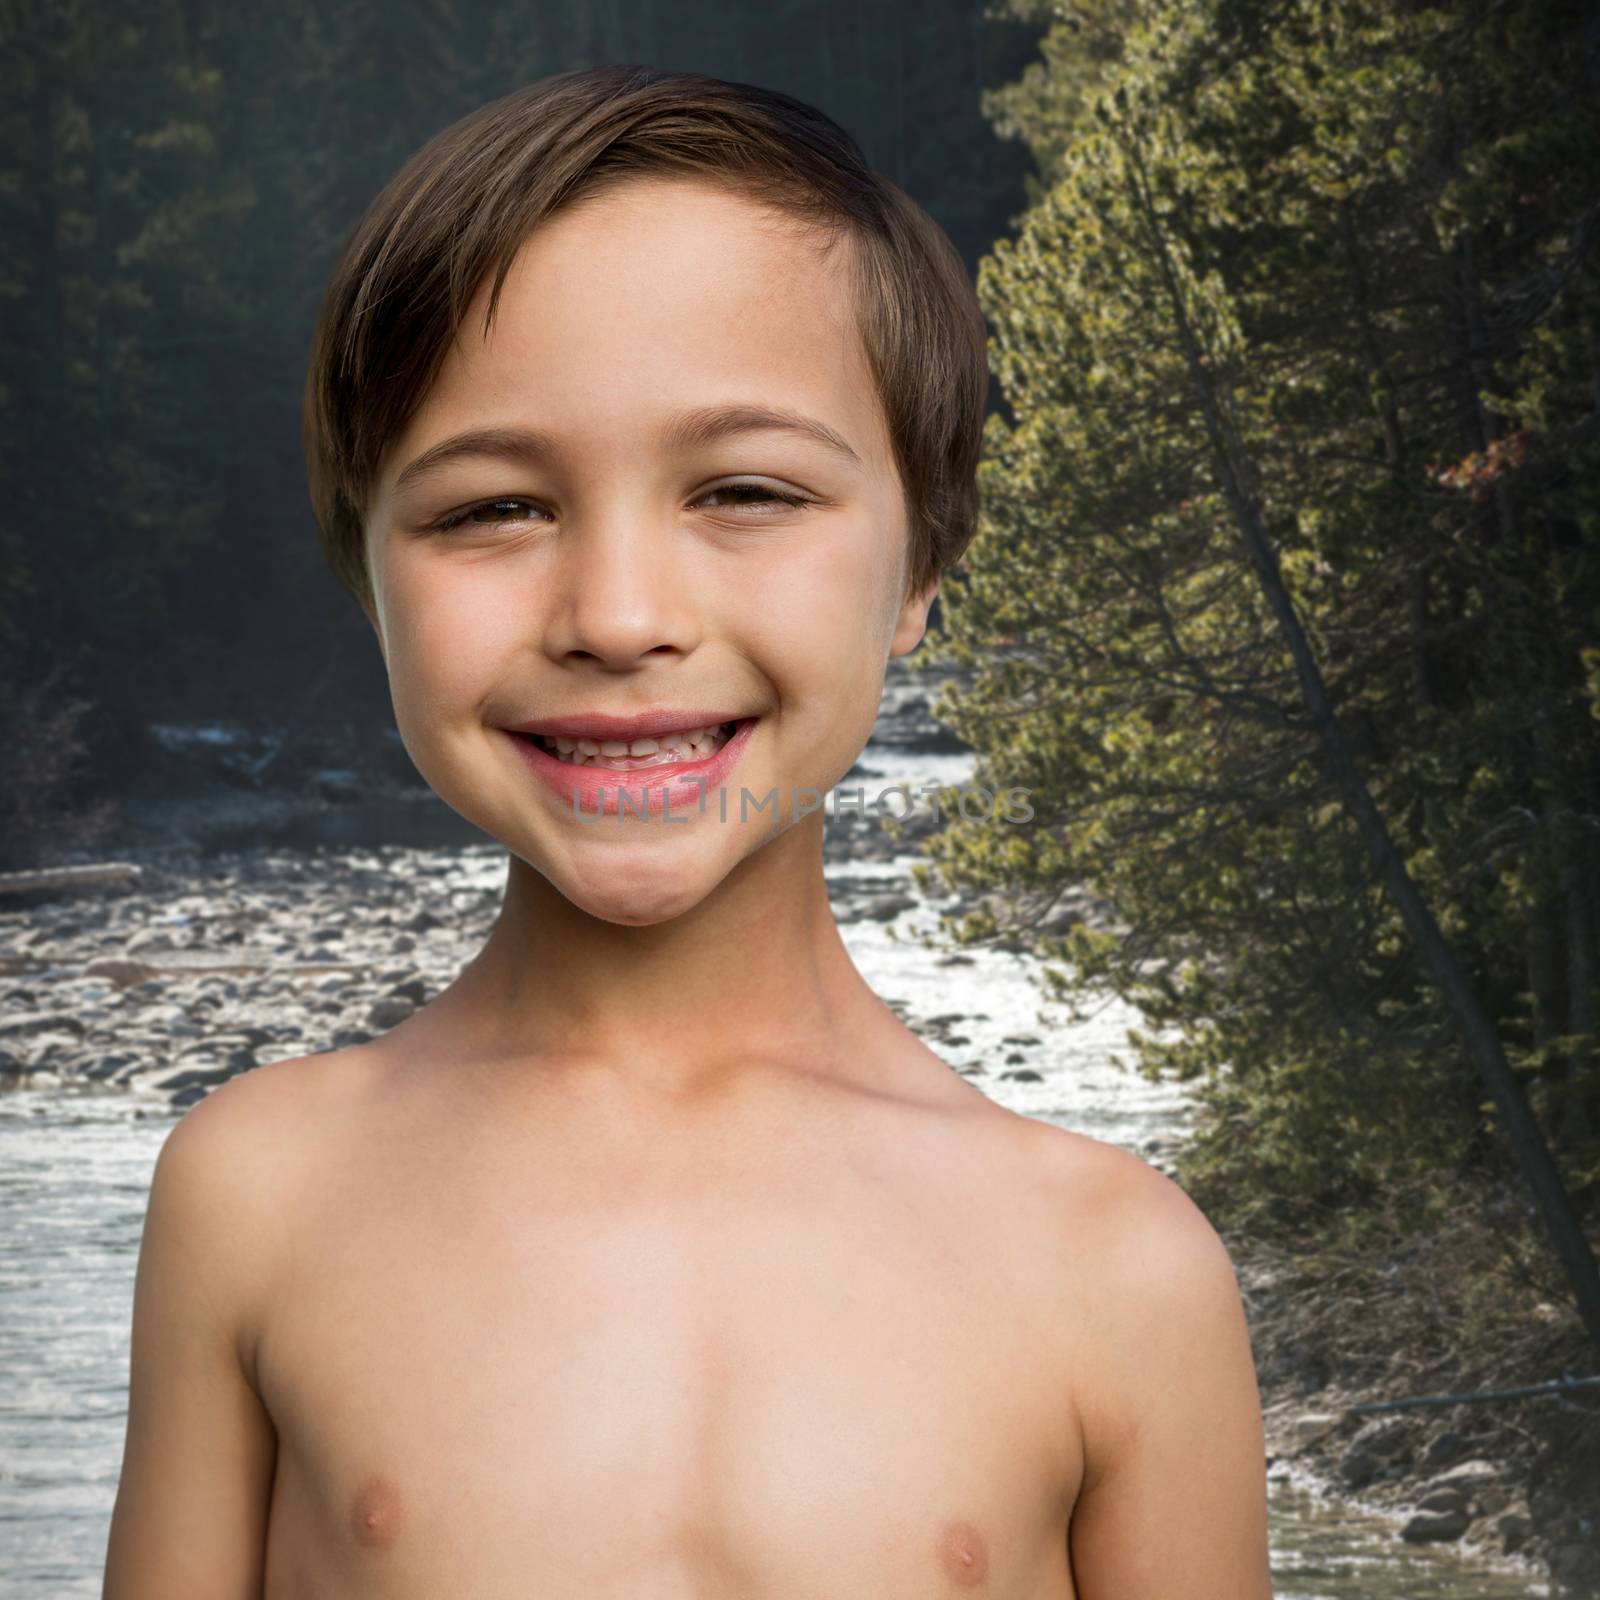 Close up of cheerful shirtless boy against river flowing through forest